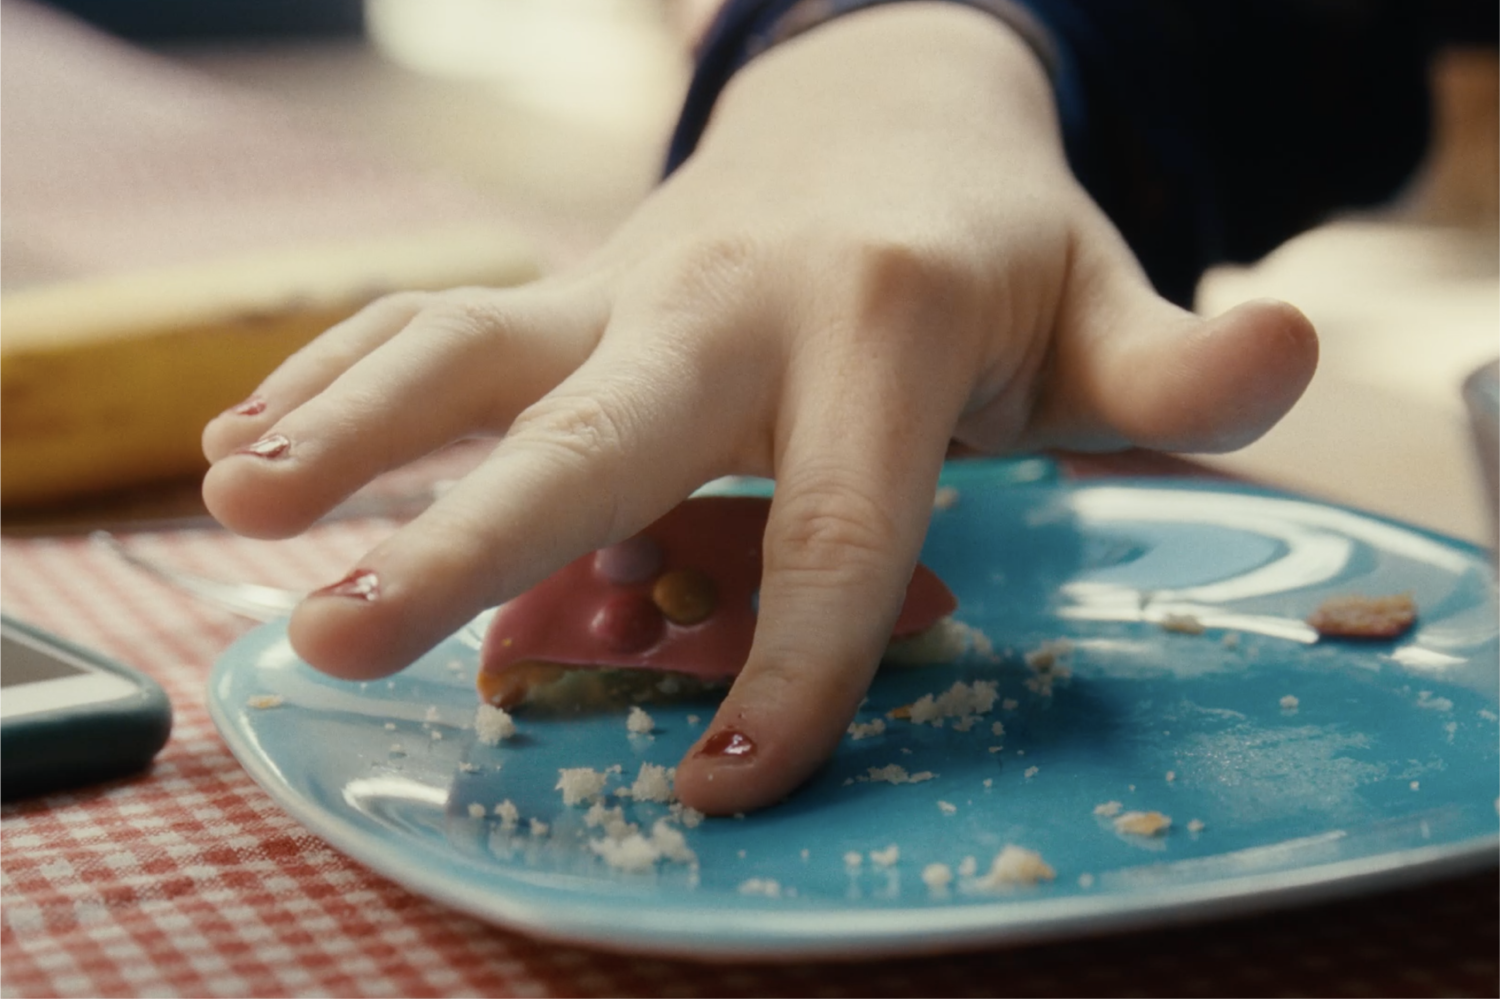 Fingers taking the last pieces of food on a plate